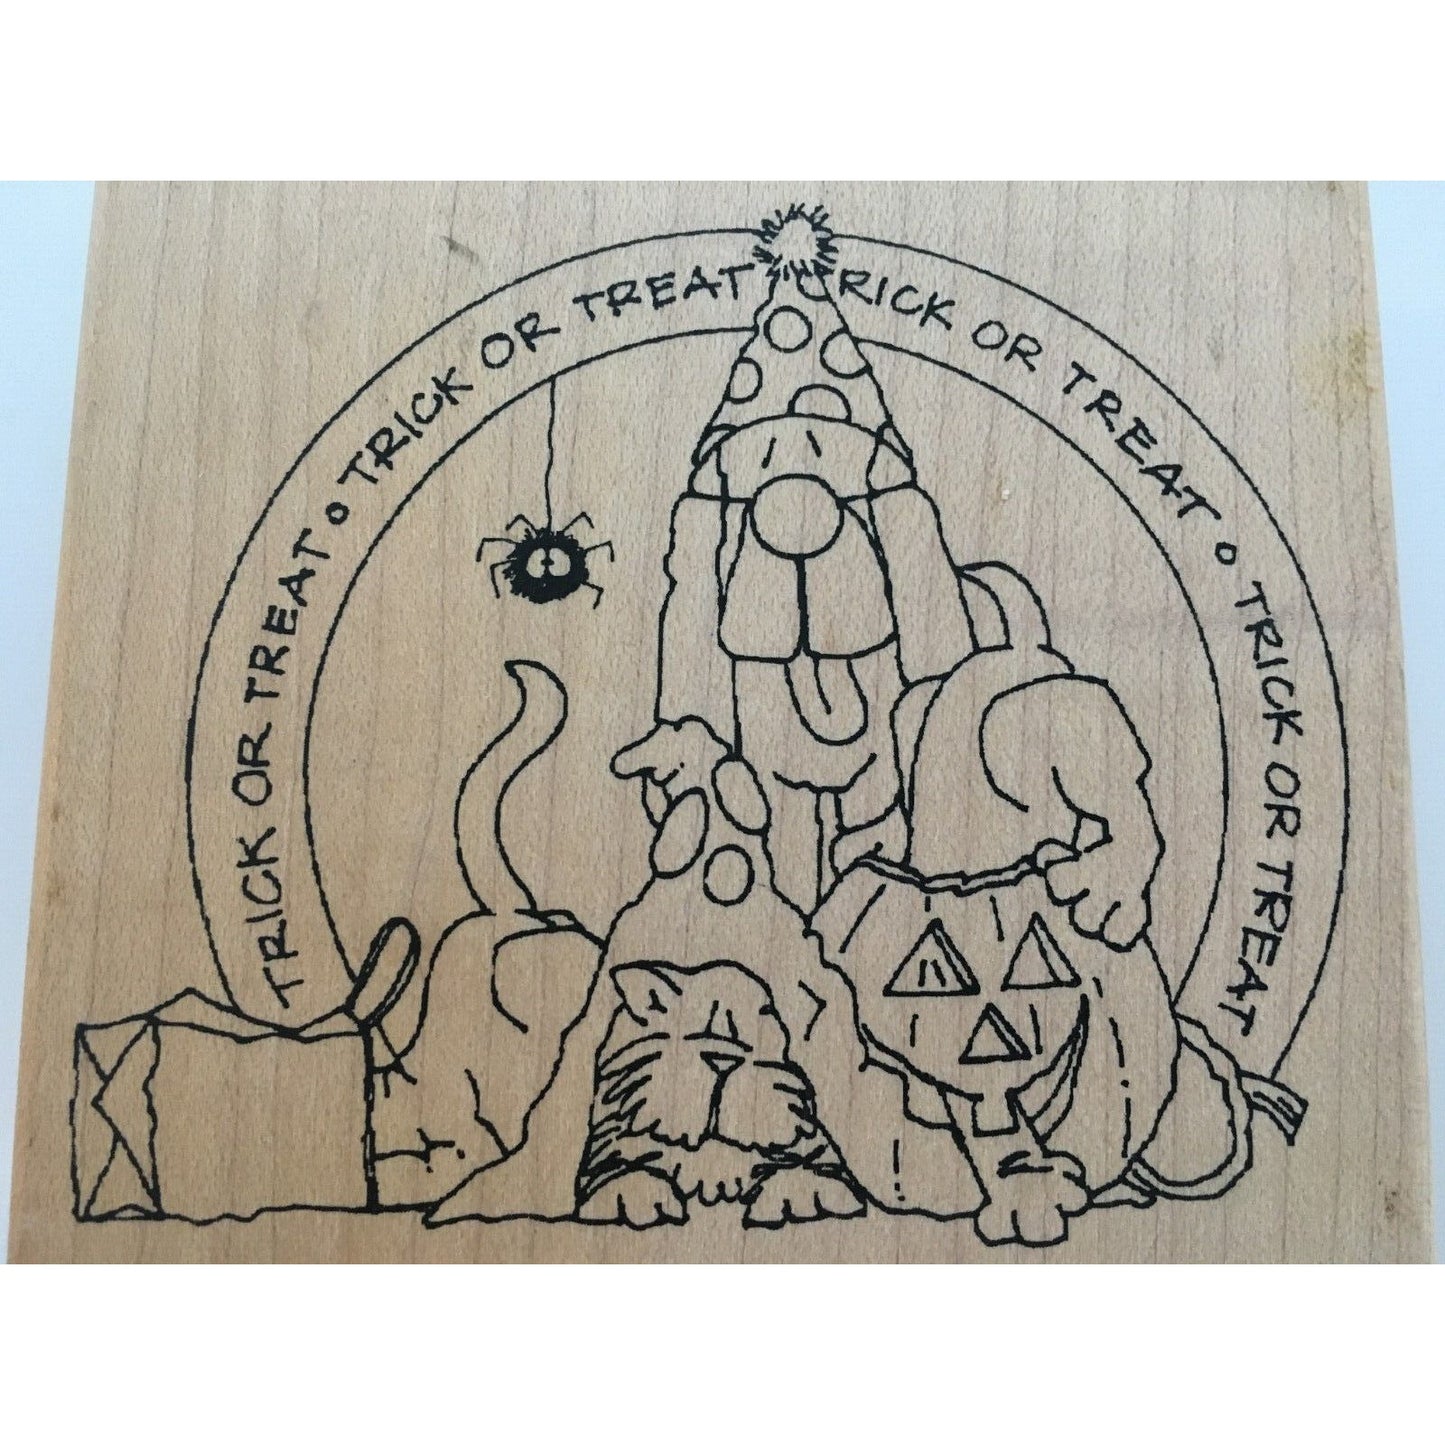 Inky Antics Rubber Stamp Trick or Treat Halloween Costume Dogs Puppy Spider Fun